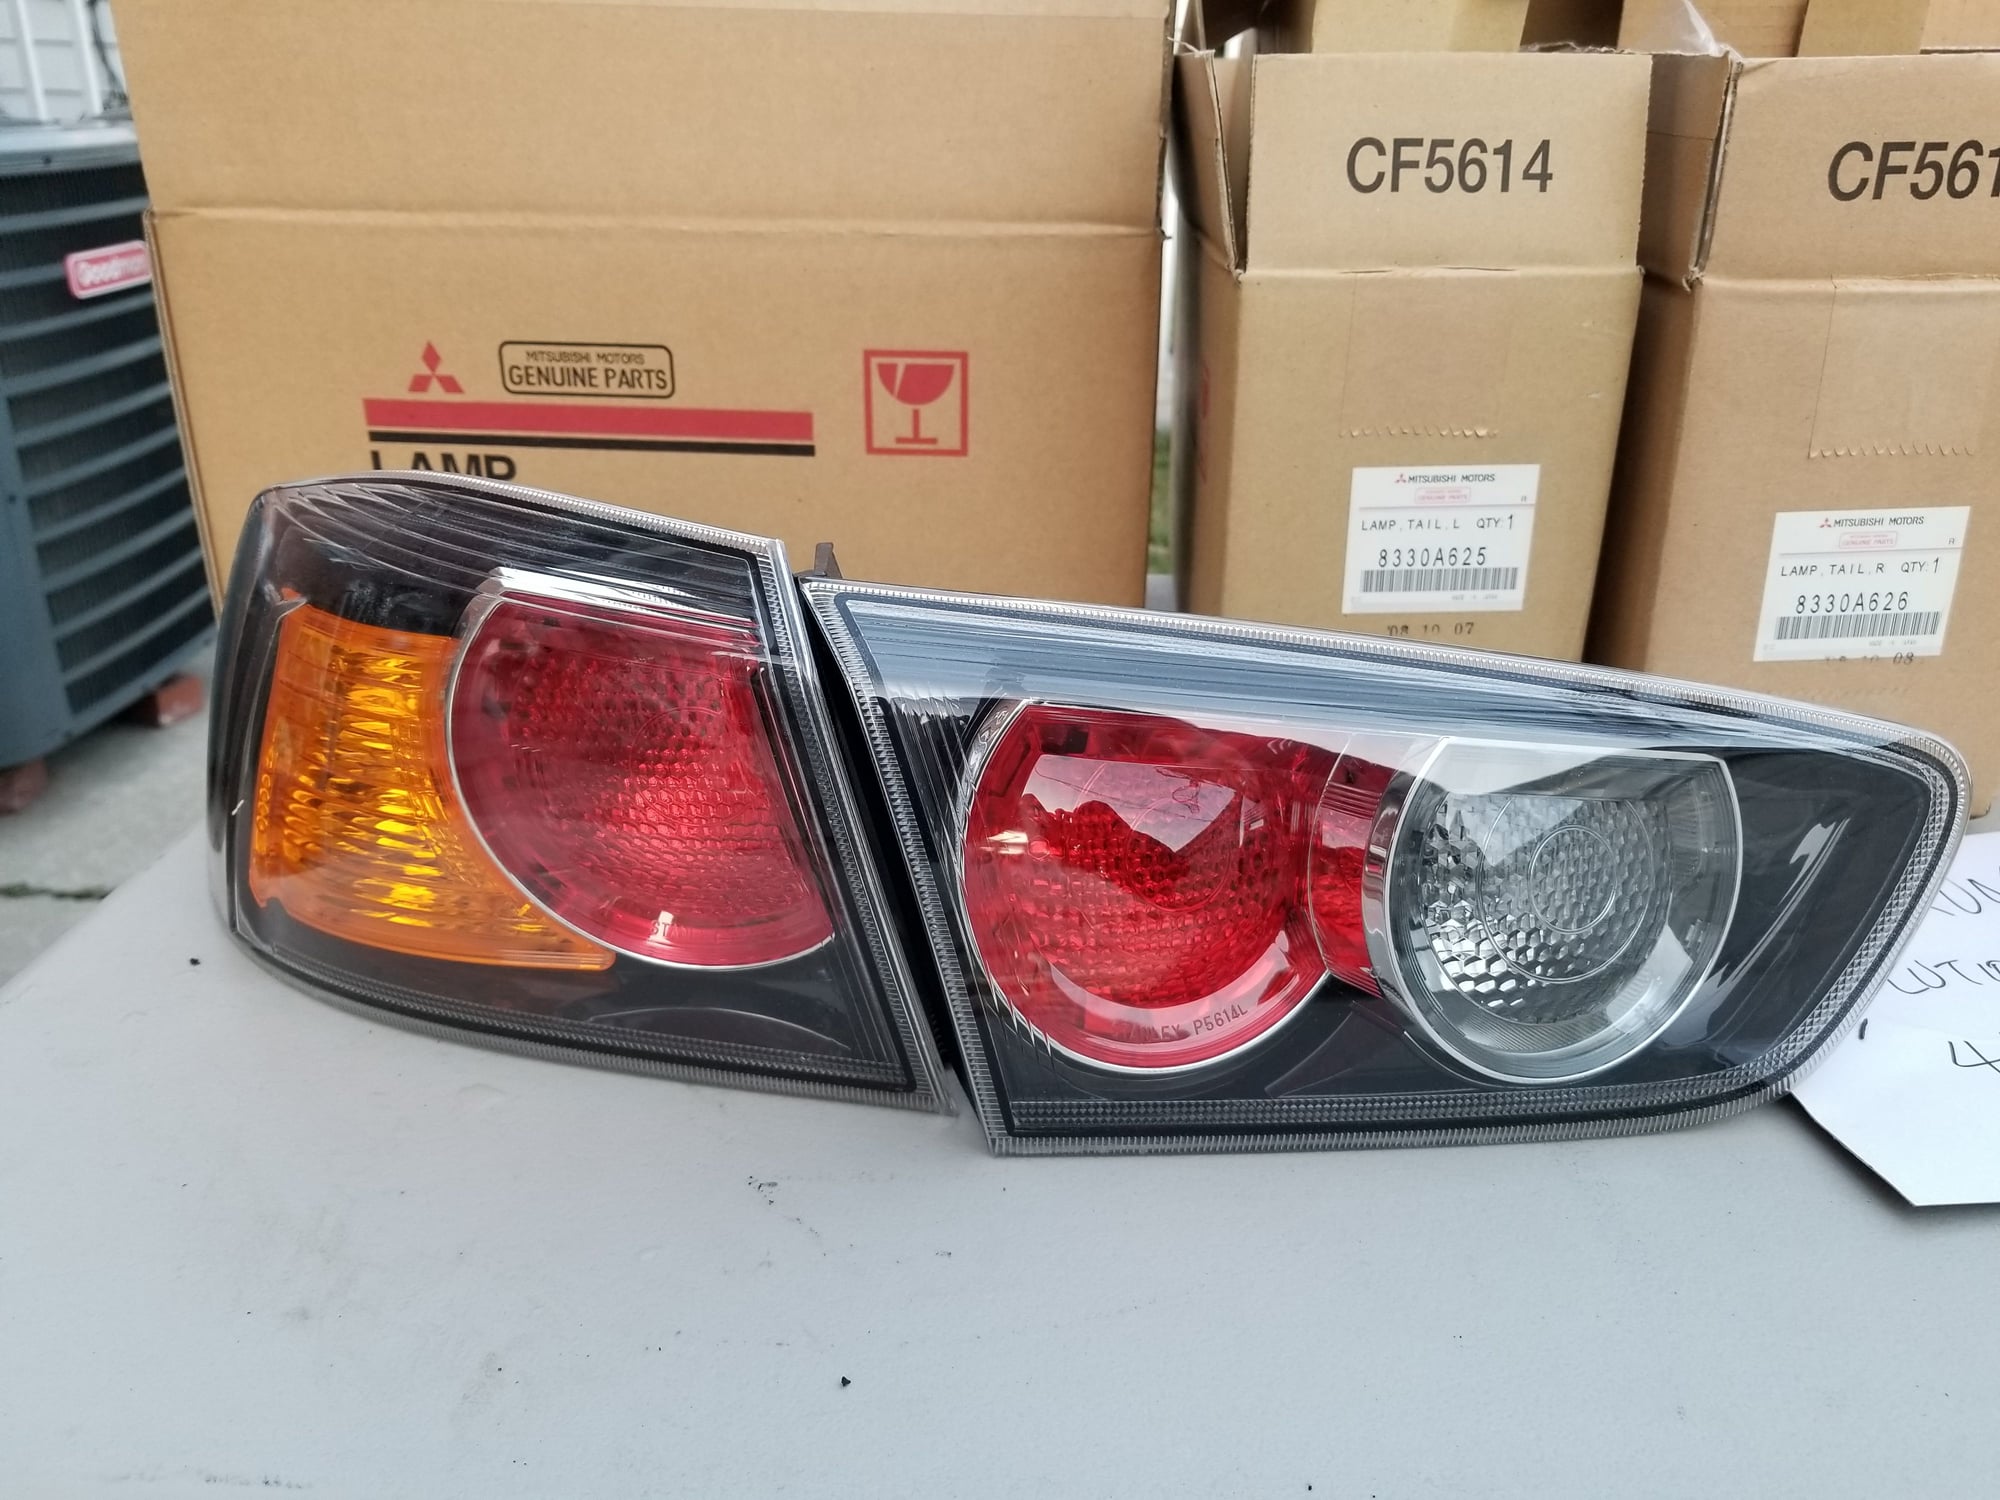 Exterior Body Parts - FS: Mitsubishi OEM Ralliart tail lights/ Brand New set of OEM Rear trunk emblems - Used - 2008 to 2015 Mitsubishi Lancer Evolution - Brooklyn, NY 11211, United States